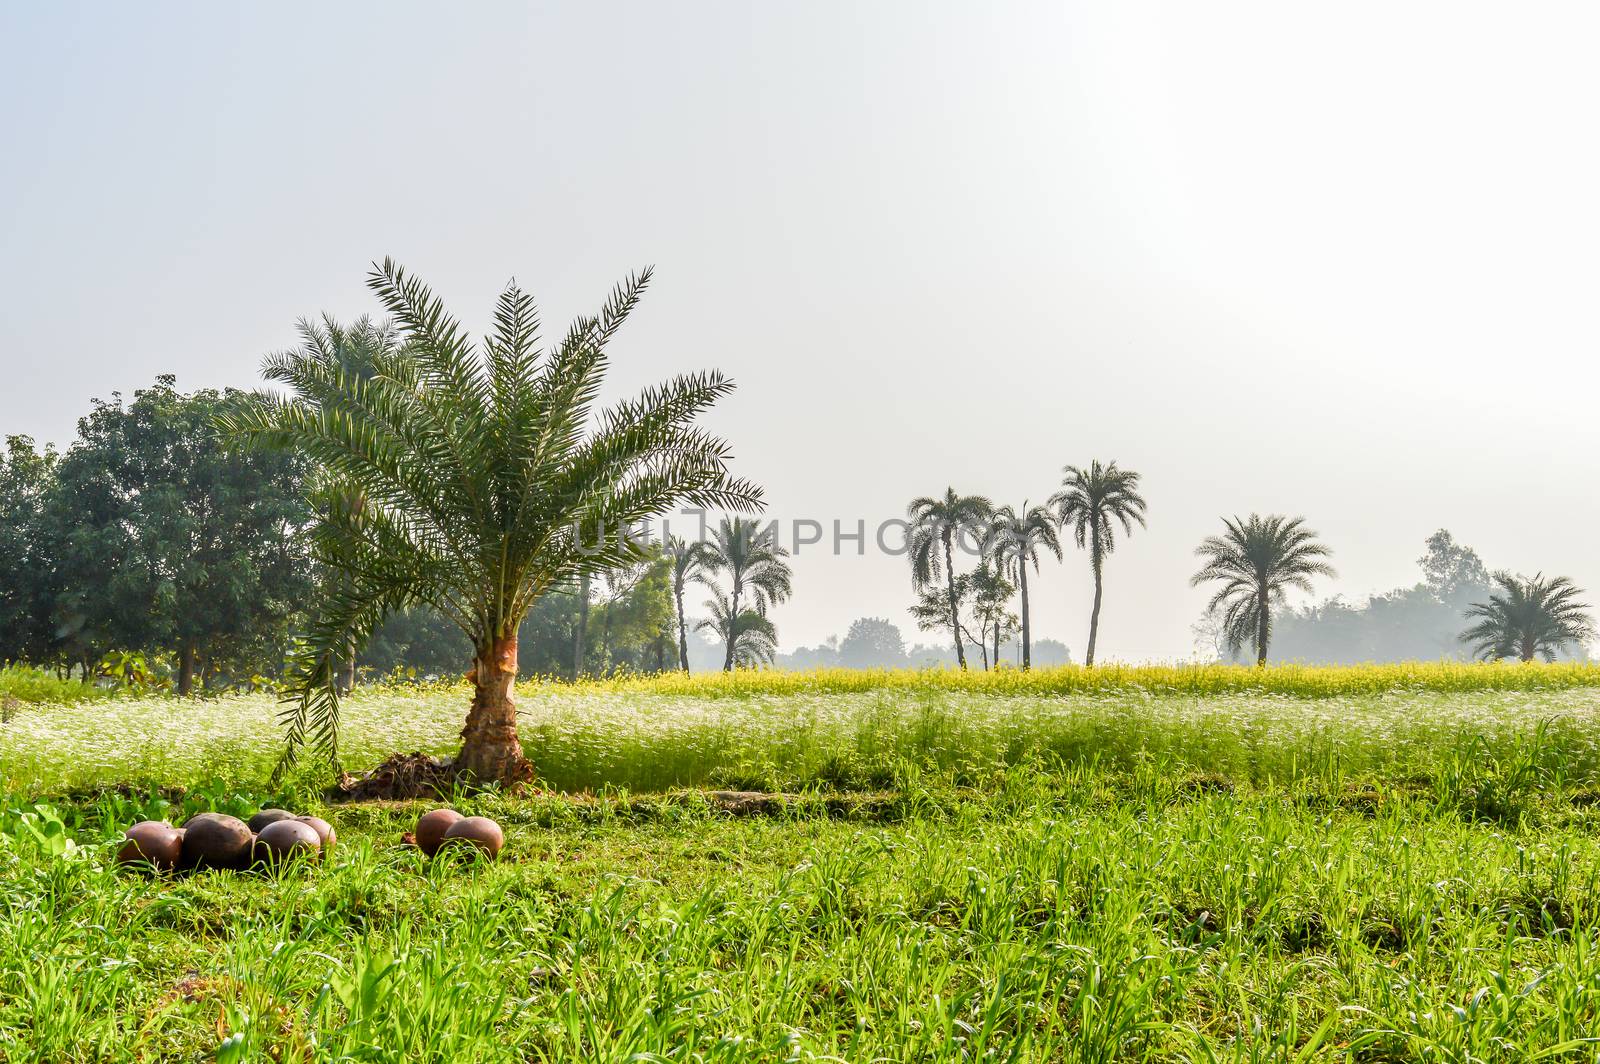 Plantation of Date Palms in an agricultural field. by sudiptabhowmick